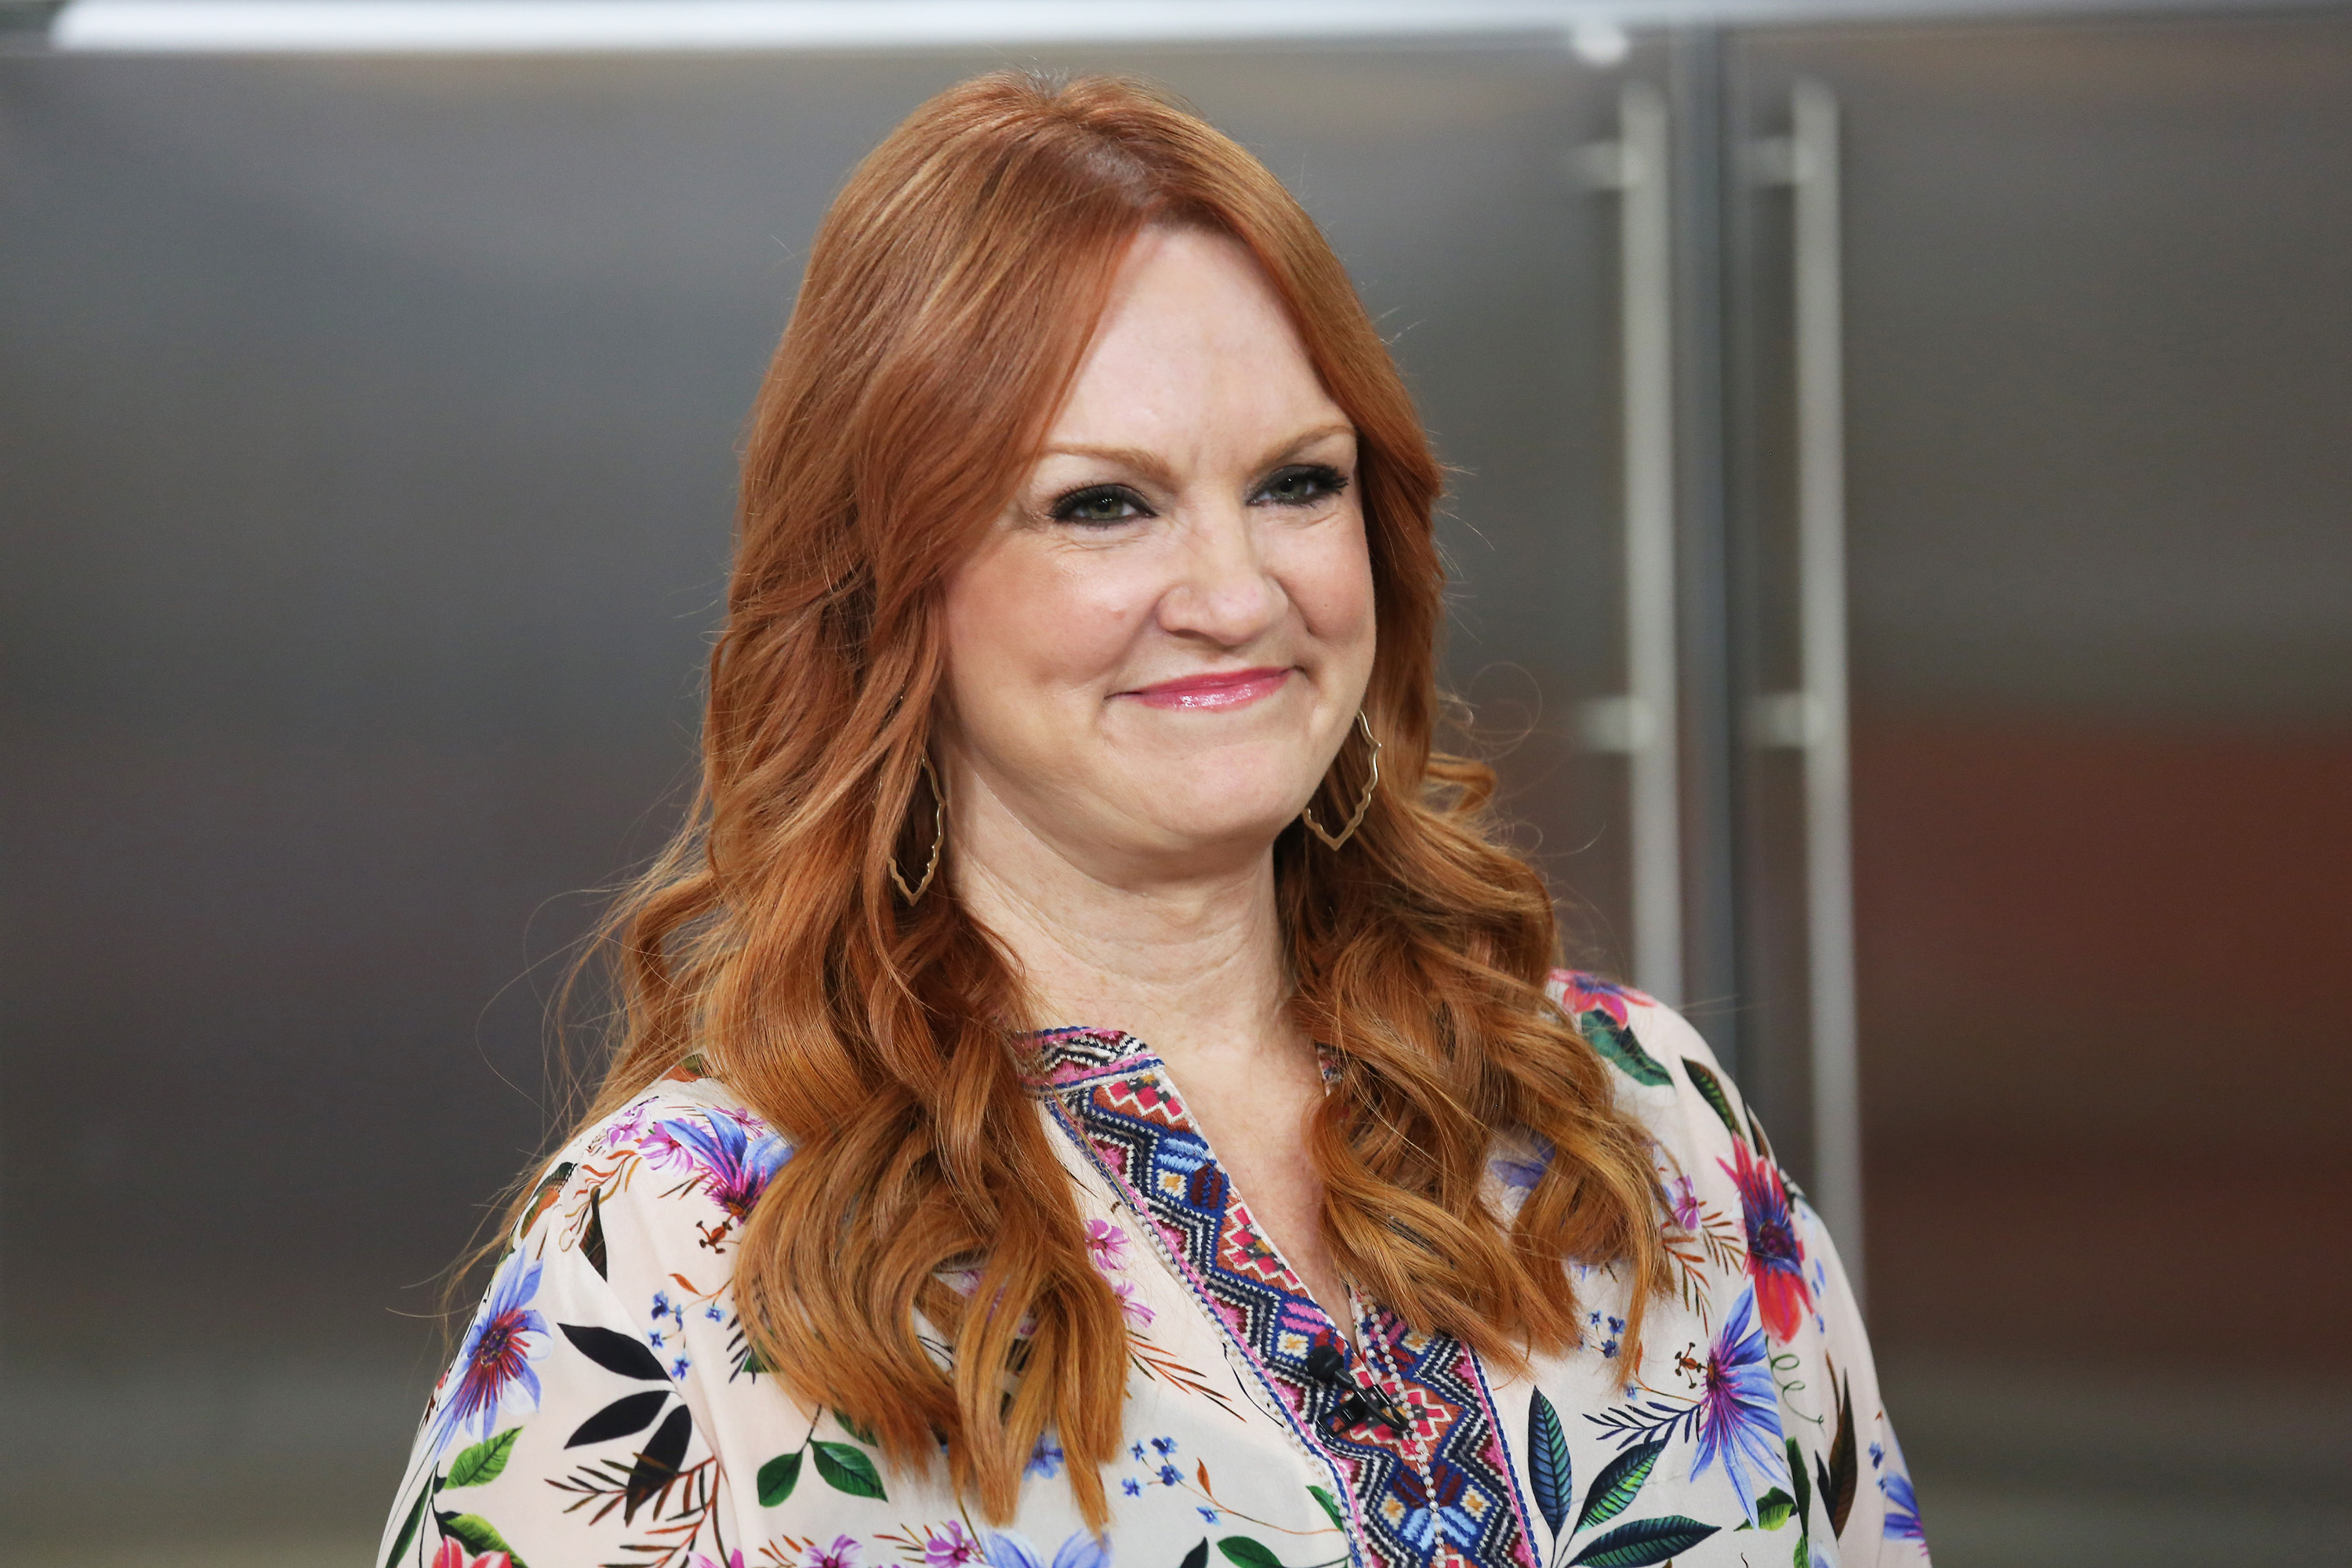 'The Pioneer Woman' star Ree Drummond smiles at the camera. She wears a multicolor print top.